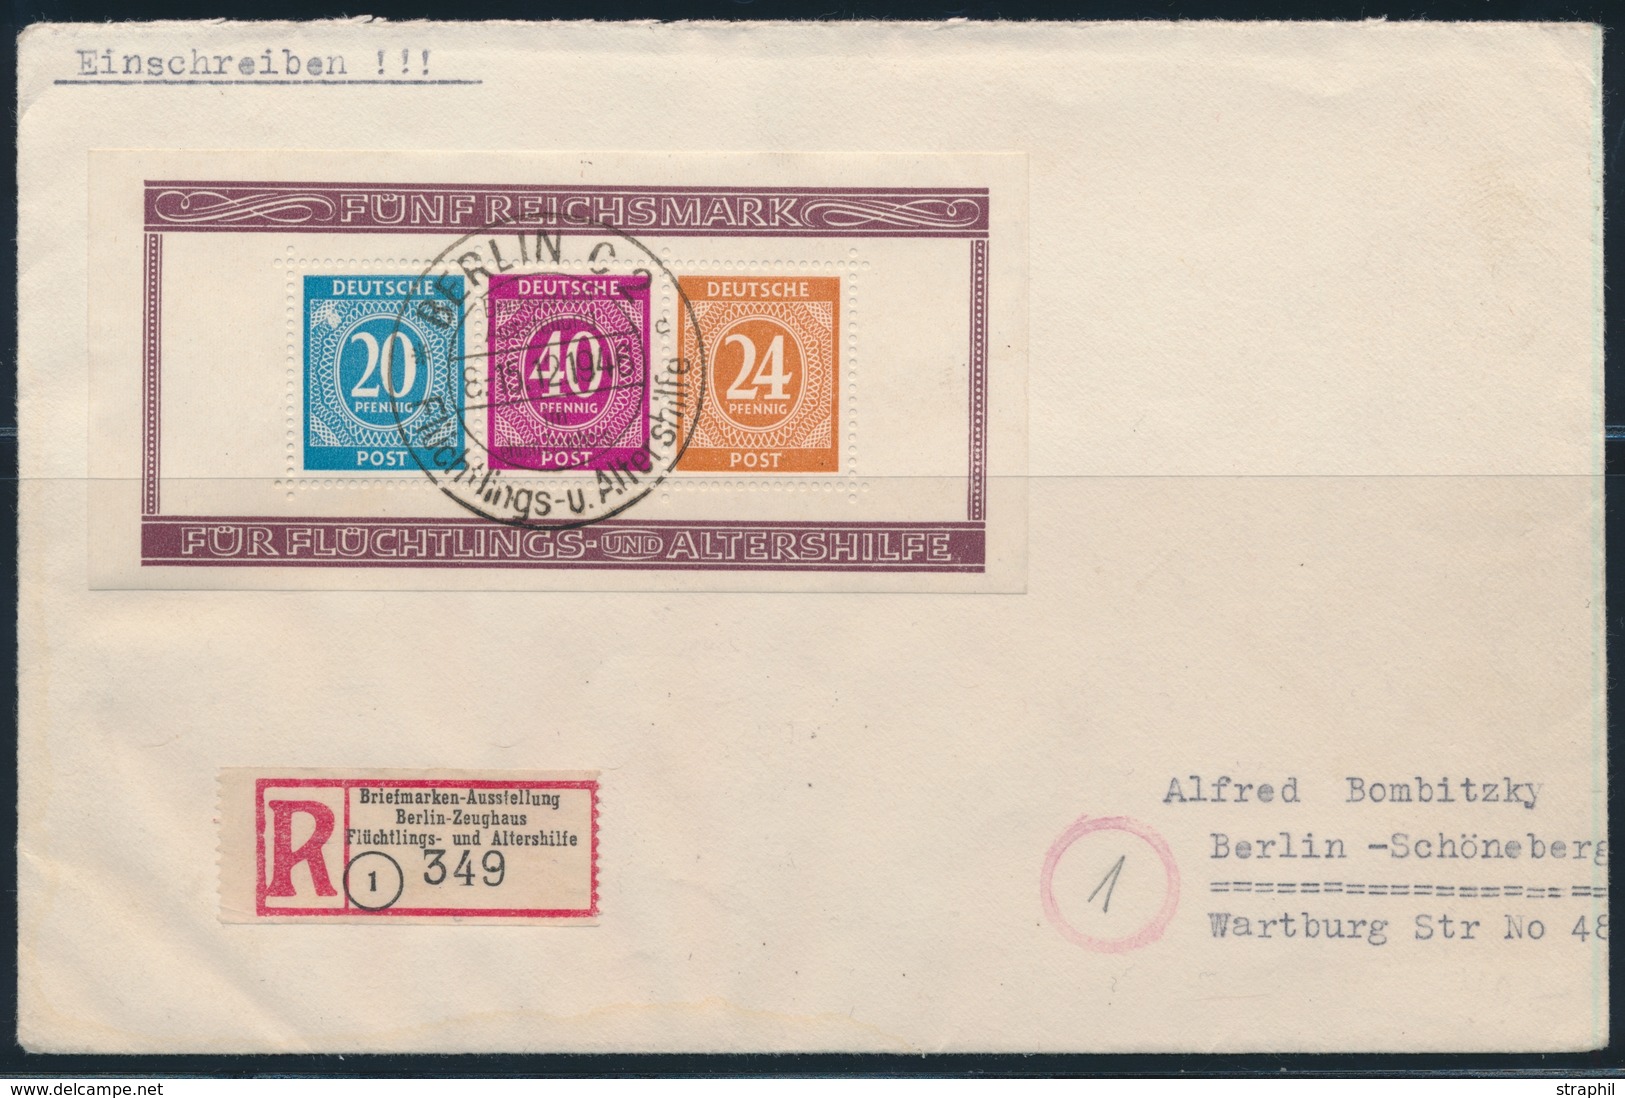 L ALLEMAGNE - ZONE AAS - L - N°1 - ND - Obl Grd Cachet  Berlin C2 - 15/12/1946 S/recom. - TB - Private & Local Mails